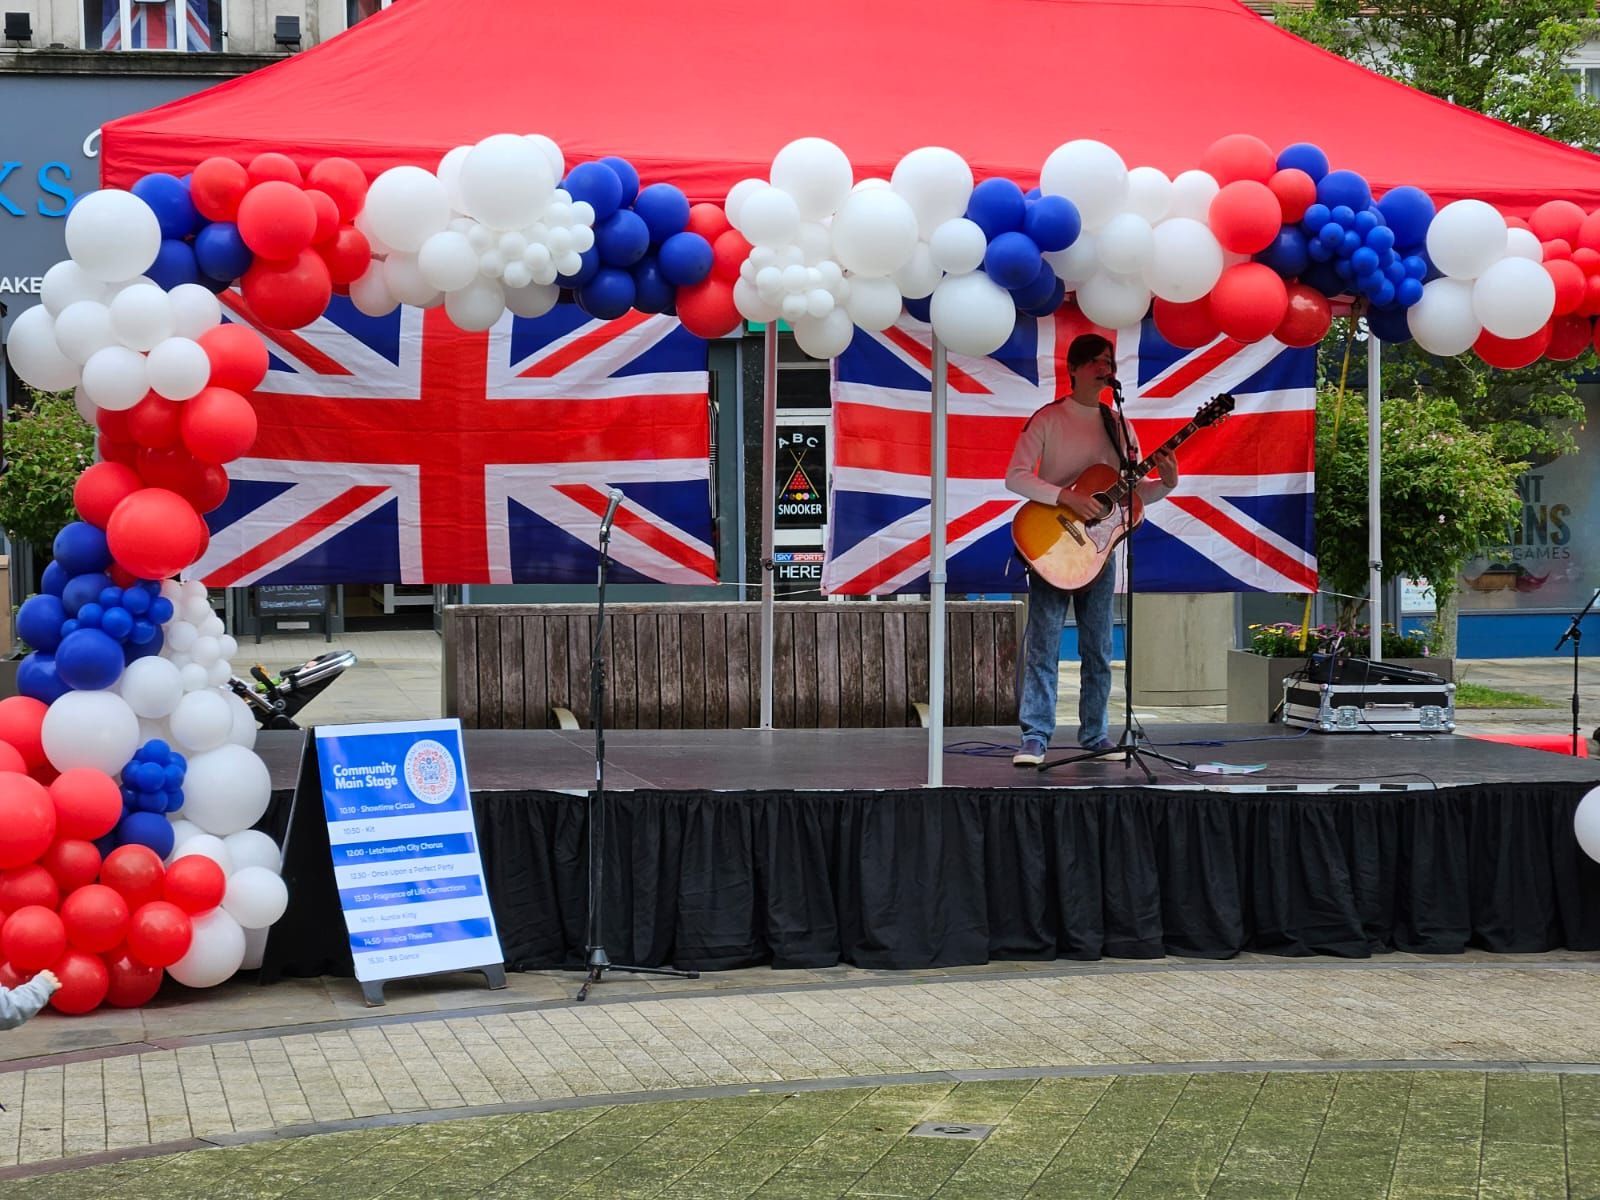 A modular stage with red canopy and red white and blue balloons around it. Solo performer on stage with a guitar